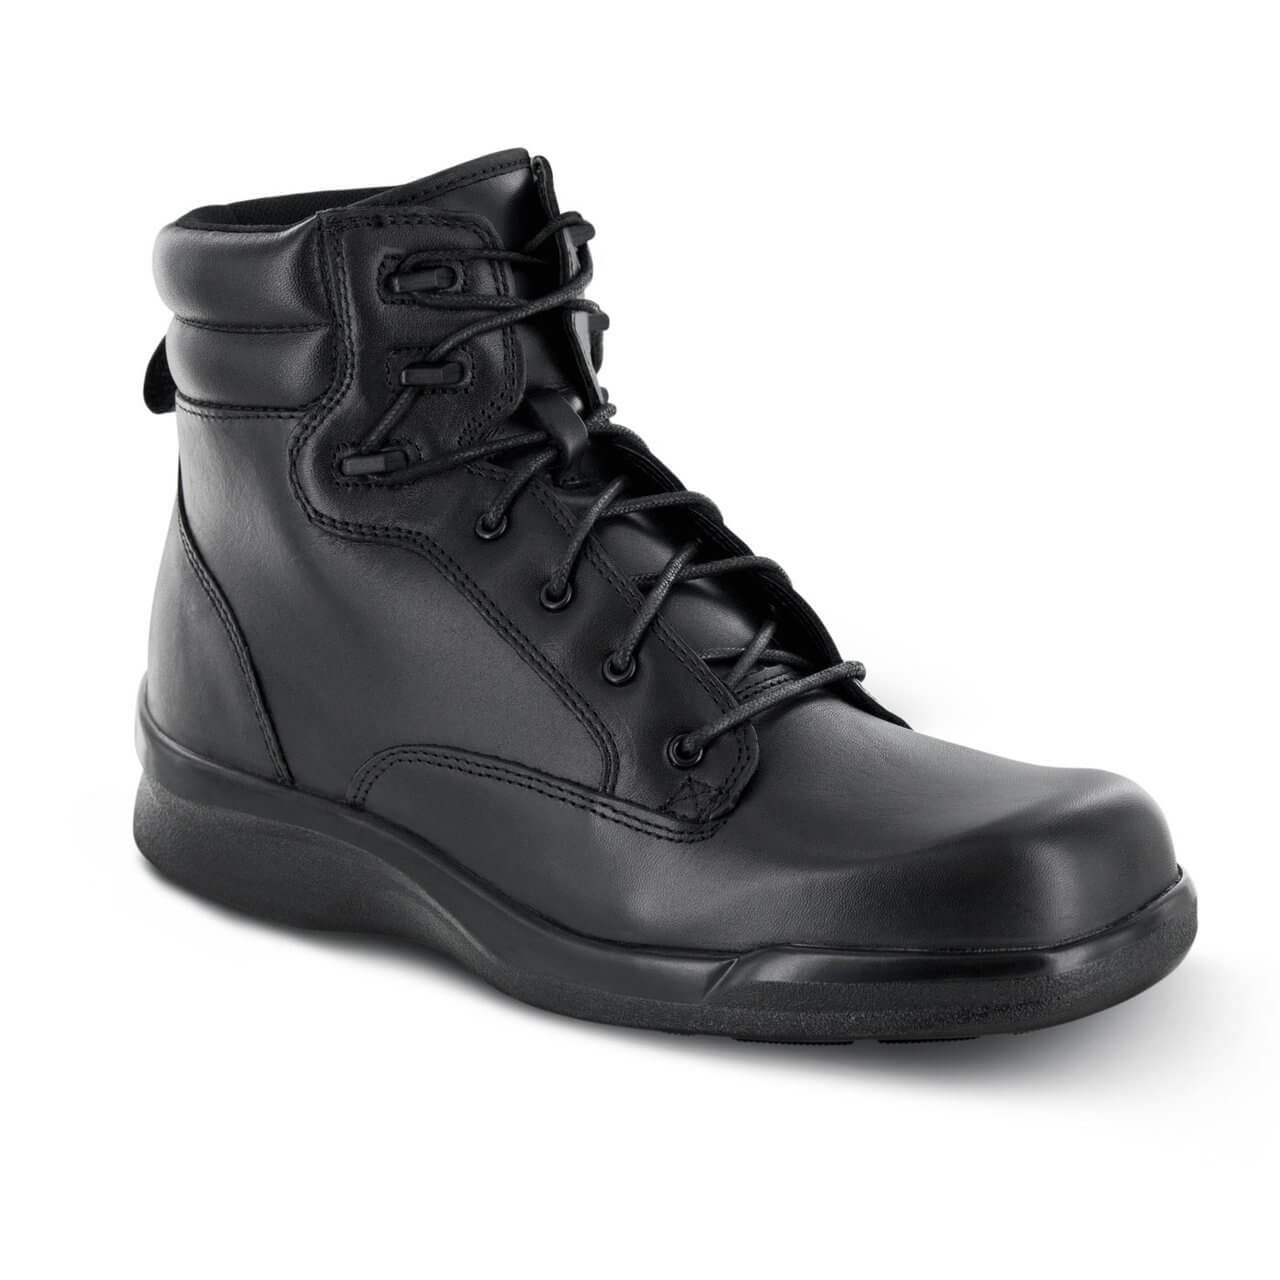 Apex Biomechanical Lace-Up - Men's Work Boots